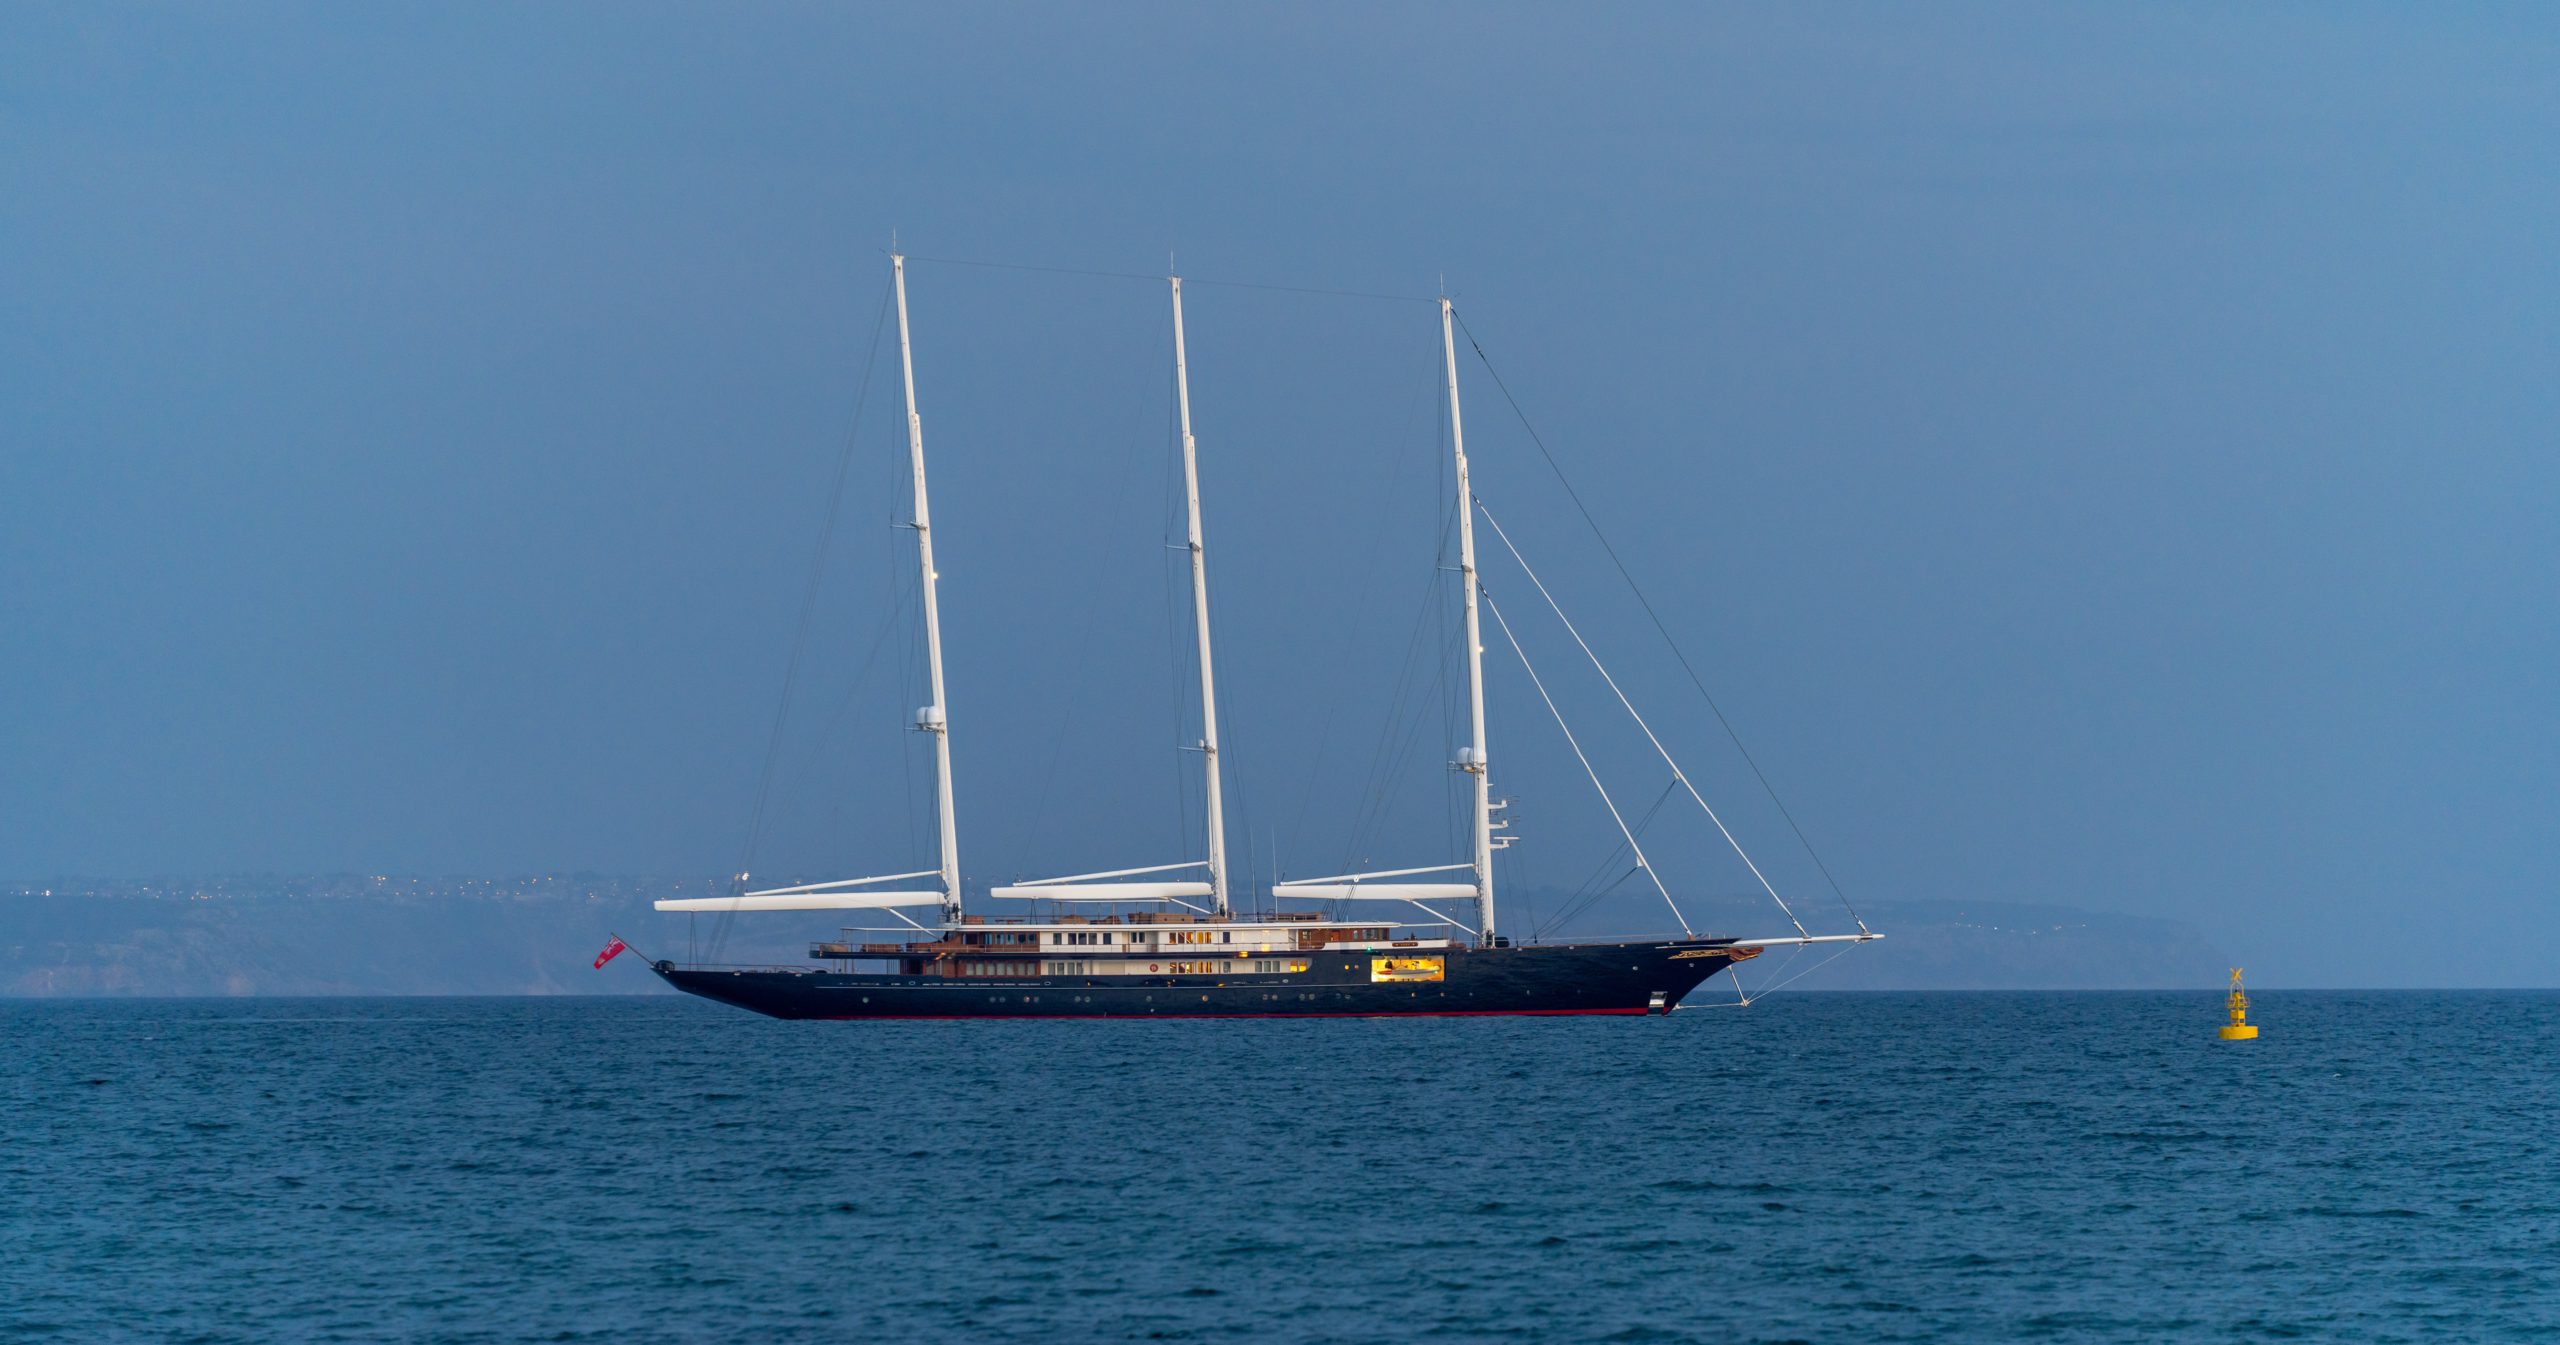 A picture of one of the most expensive yachts in the world, the iconic Lürssen Octopus superyacht.